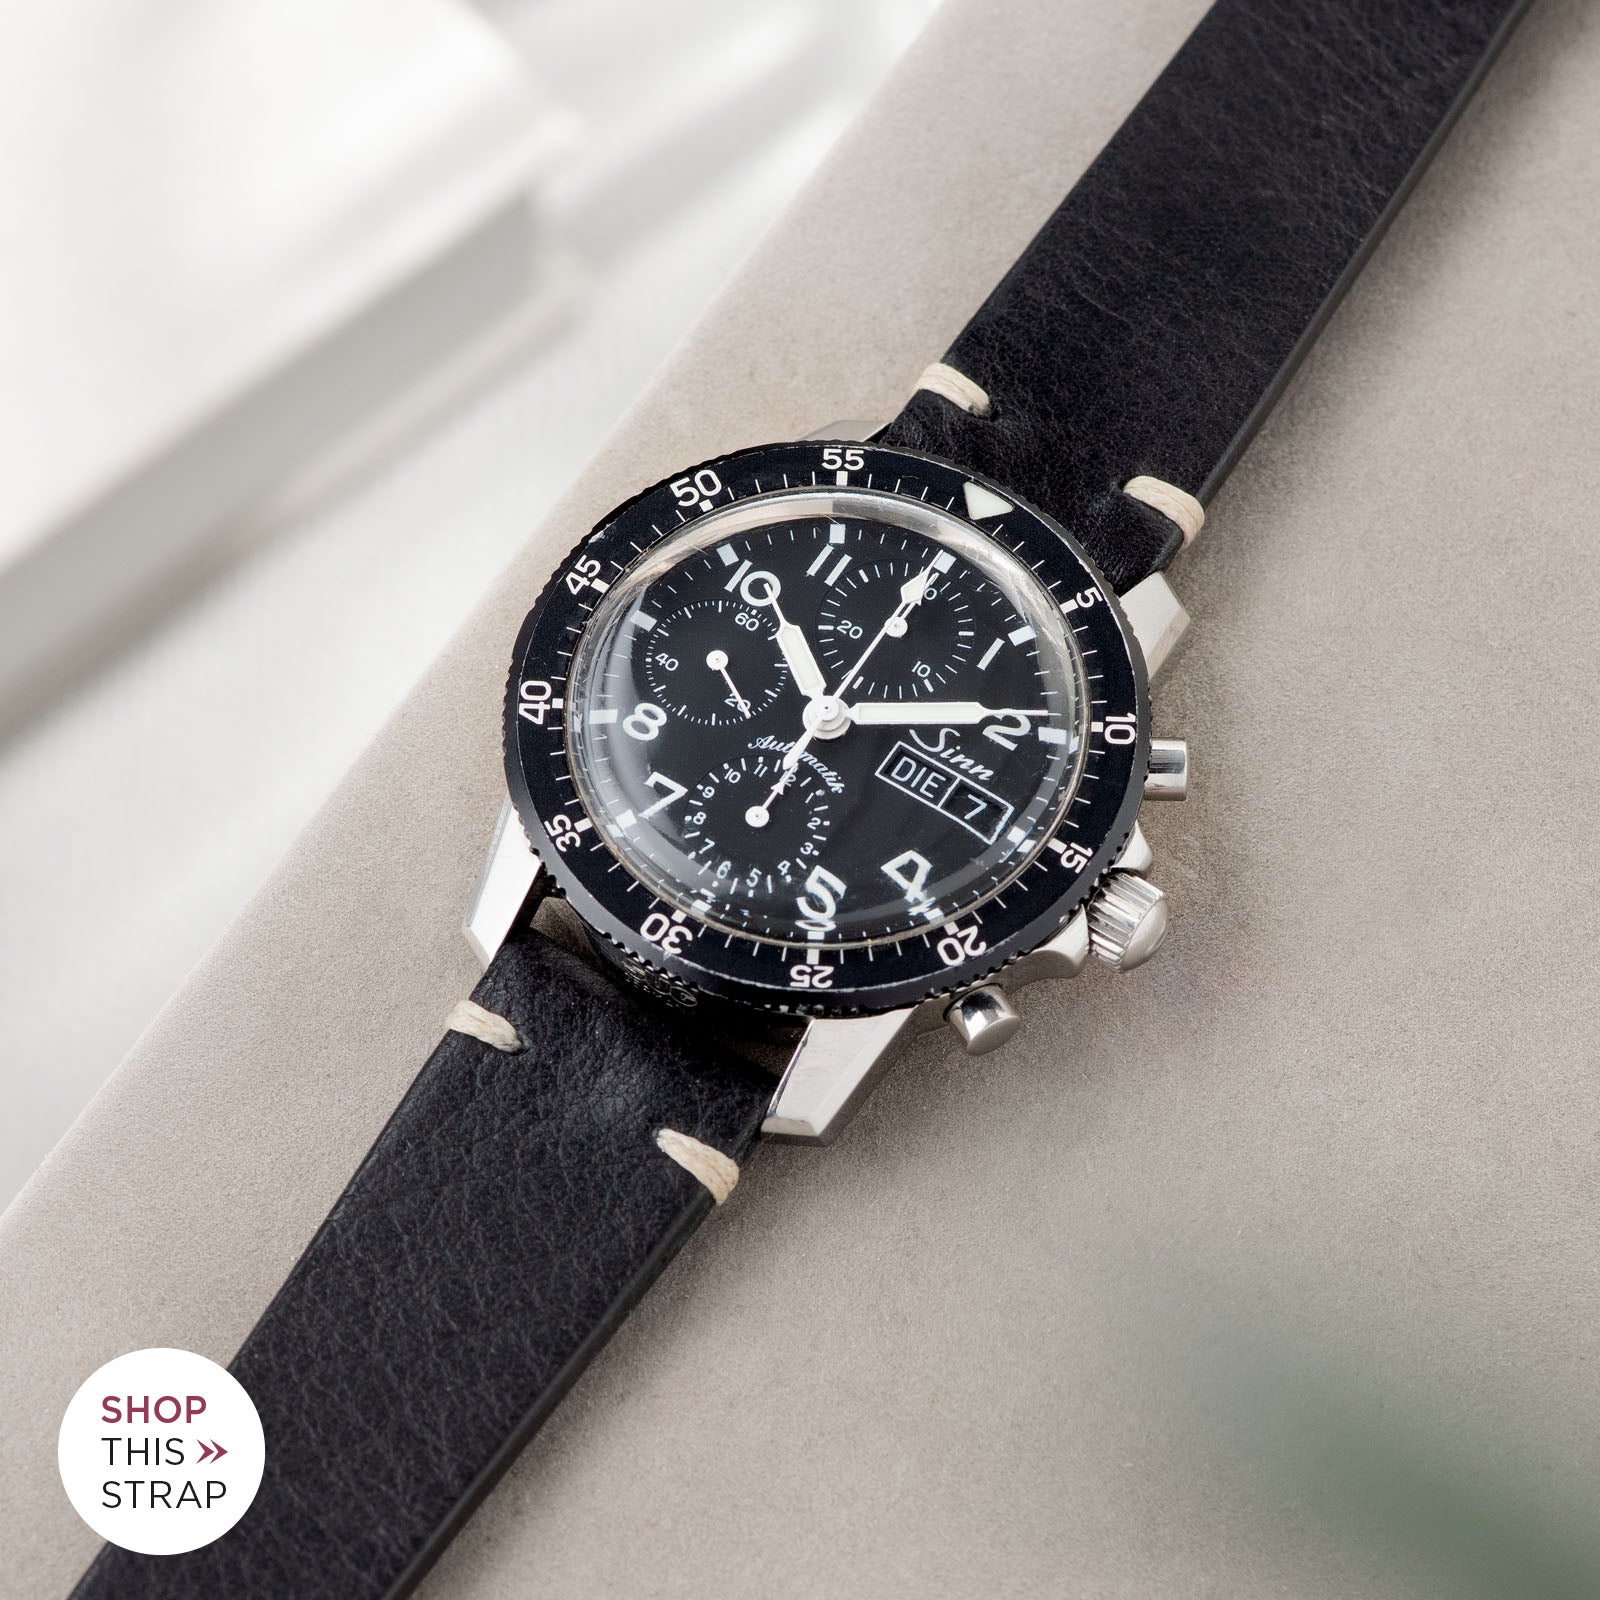 Bulang and Sons_Strap Guide_Sinn 103St Flieder Chronograph_Black Leather Watch Strap